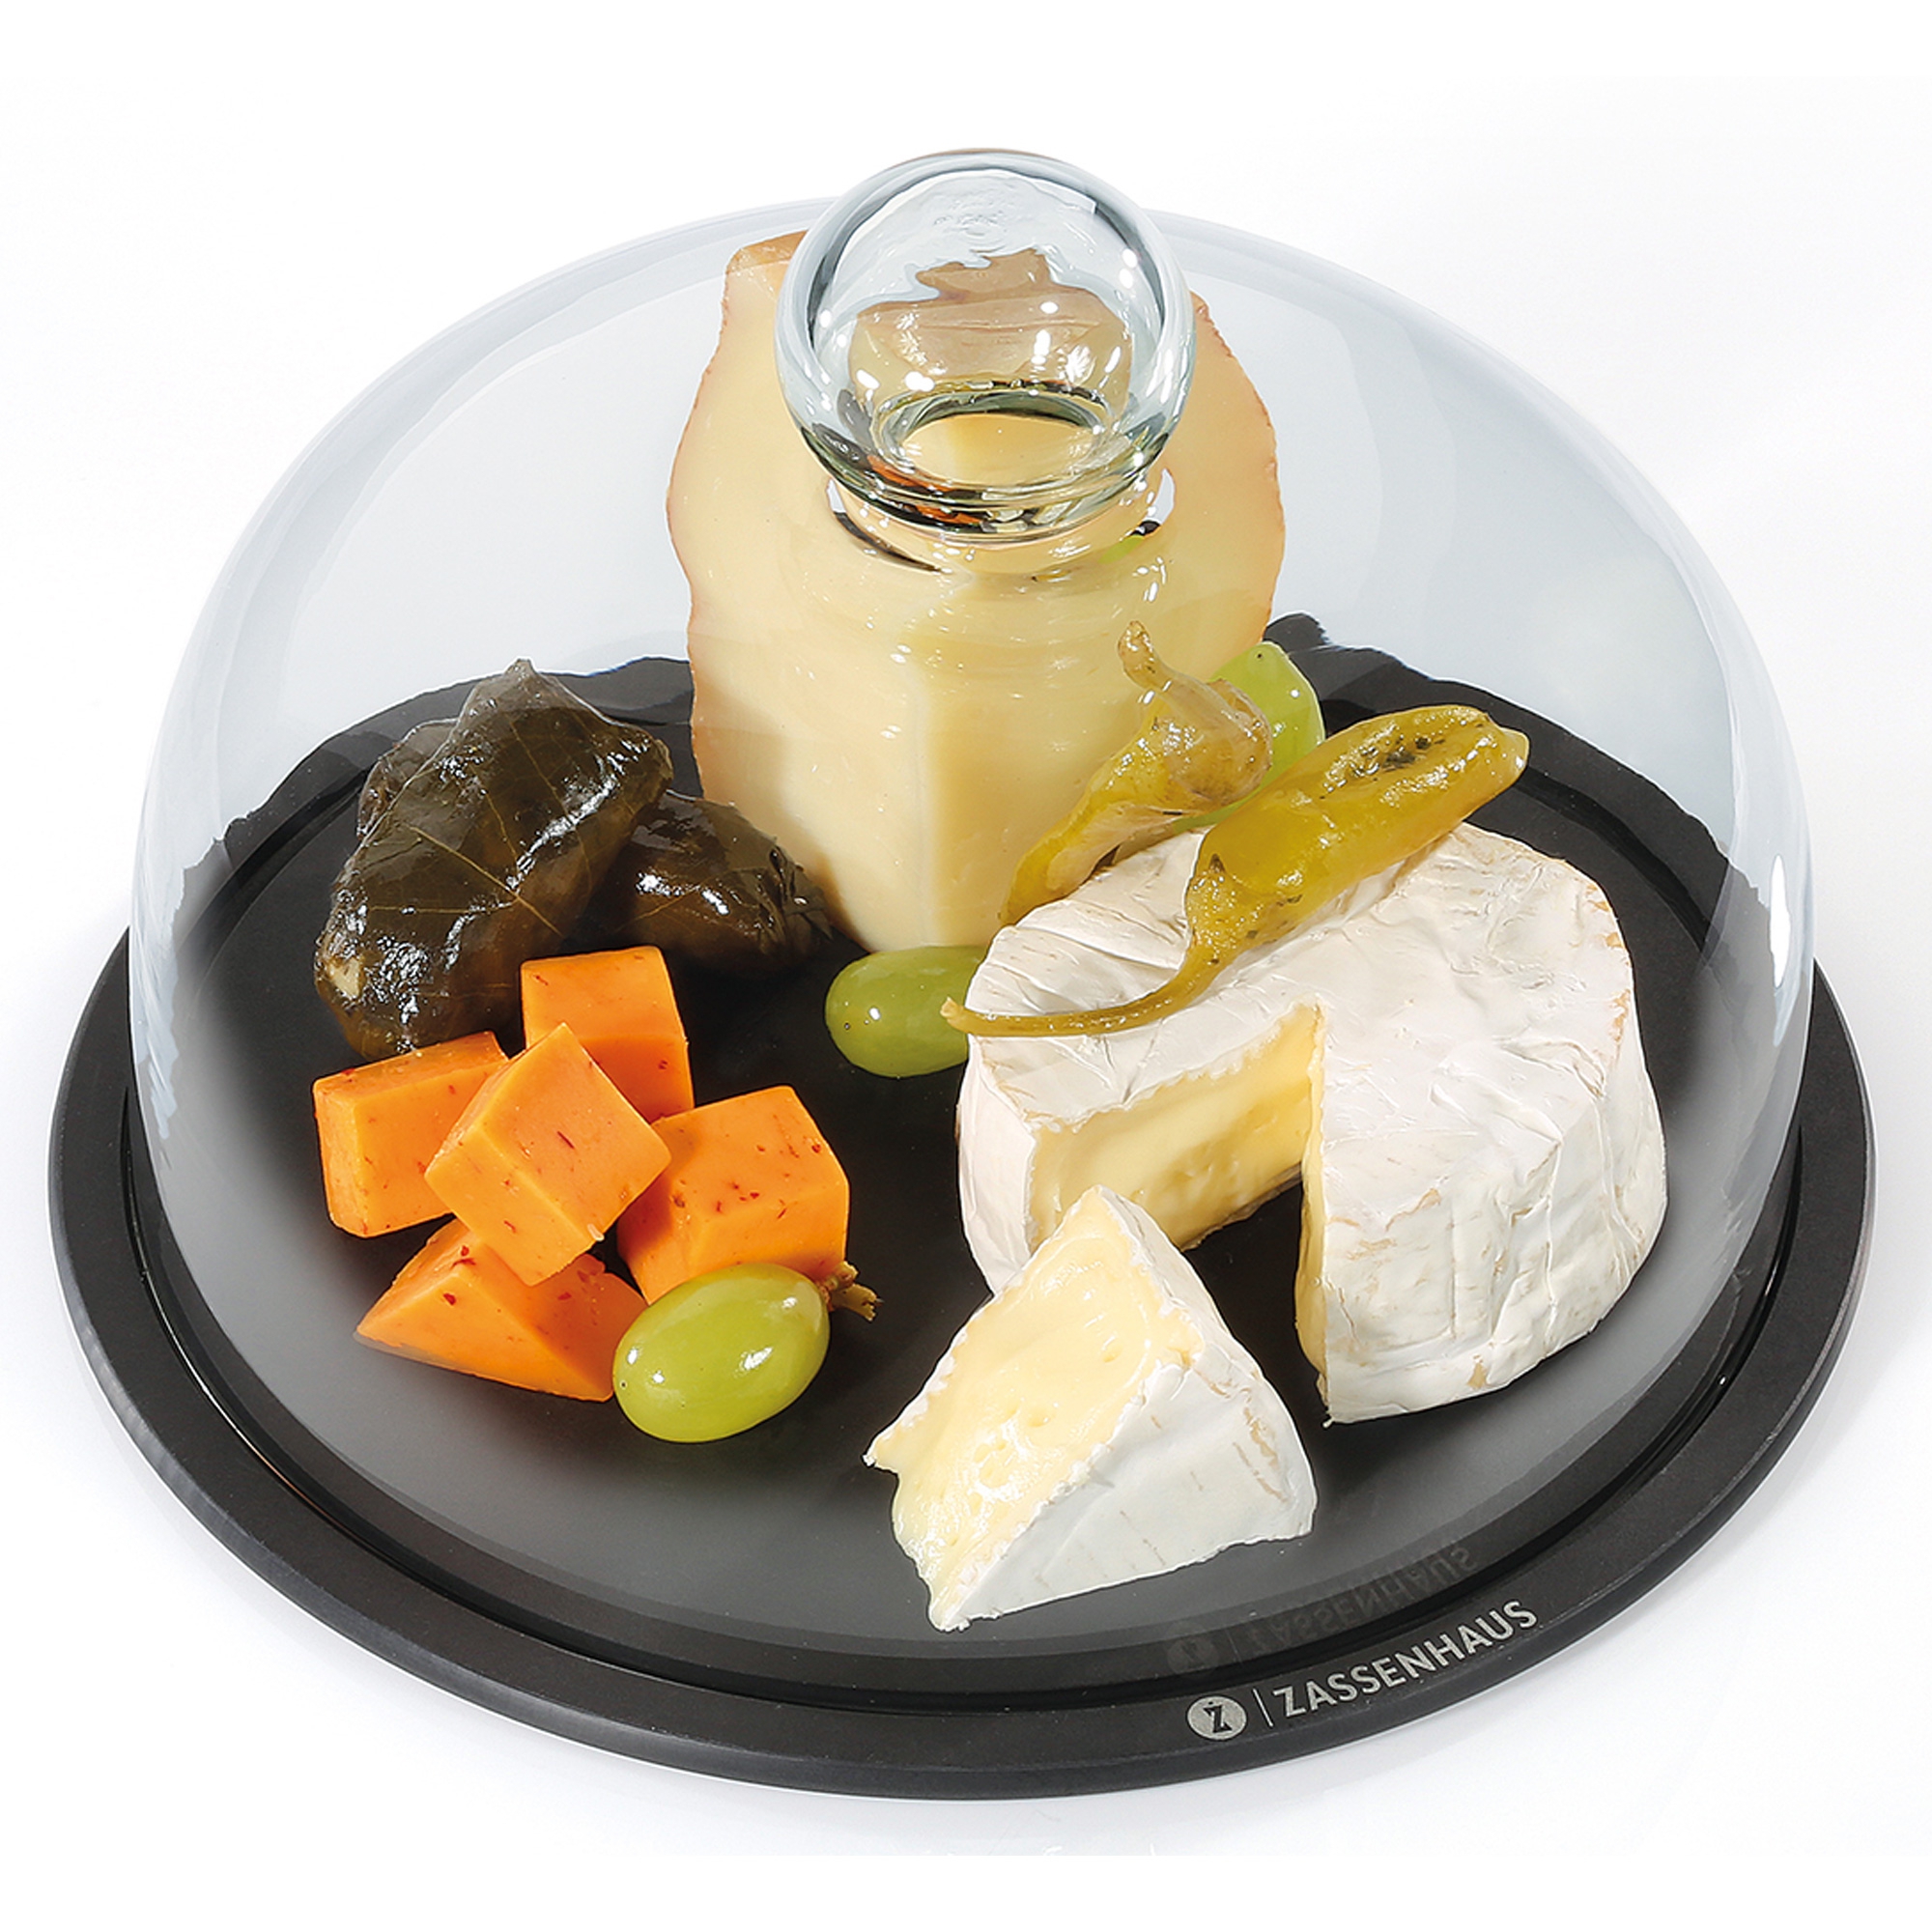 Zassenhaus - COMFORT PLUS cheese cover with glass lid - 23 cm